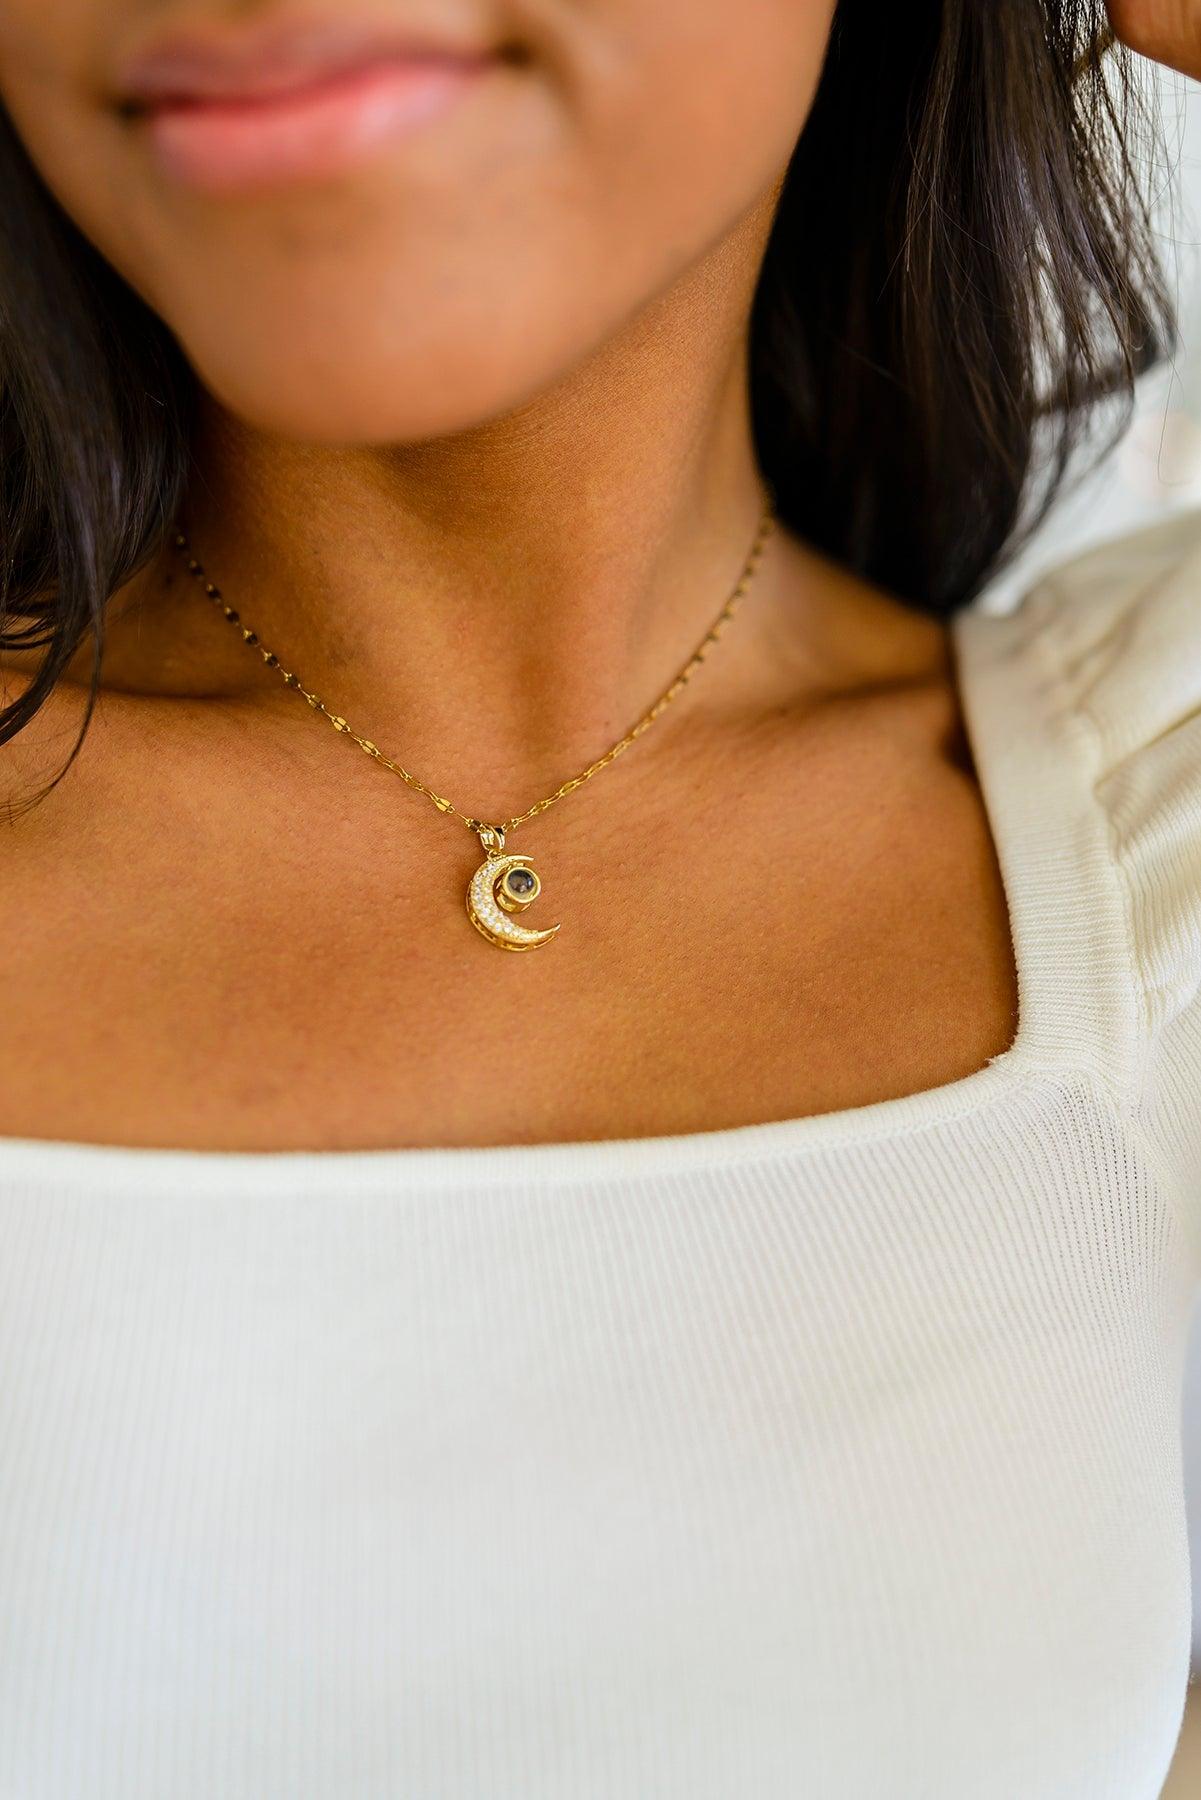 Crescent Moon Necklace - The Fiery Jasmine